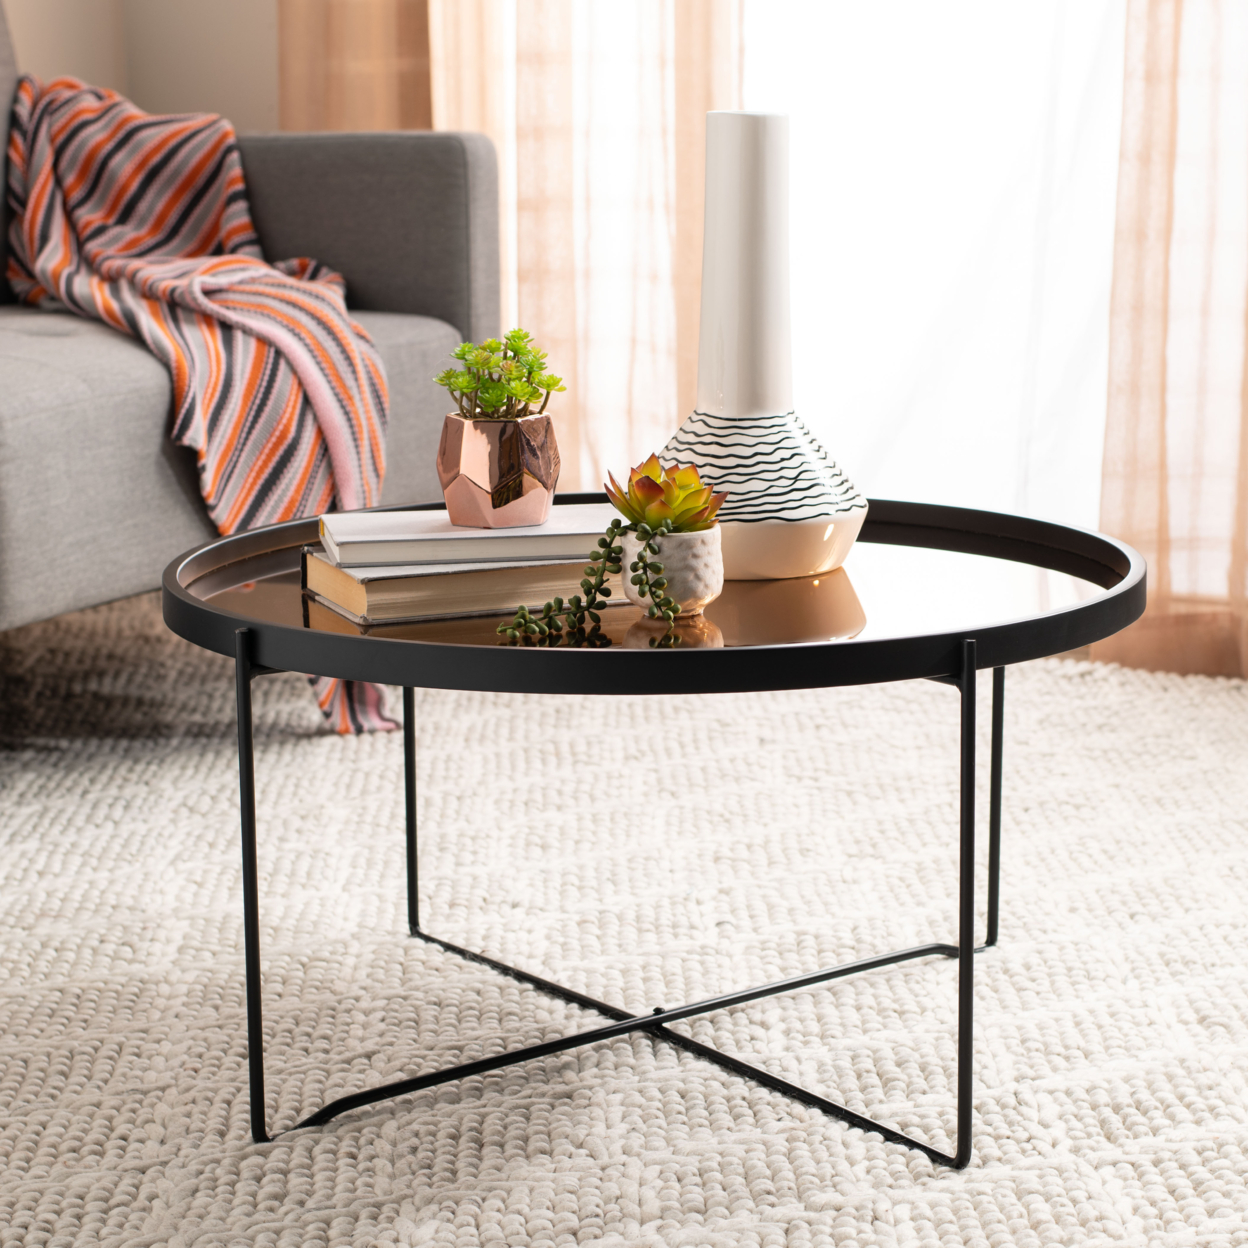 SAFAVIEH Ruby Round Tray Top Coffee Table Rose Gold / Black